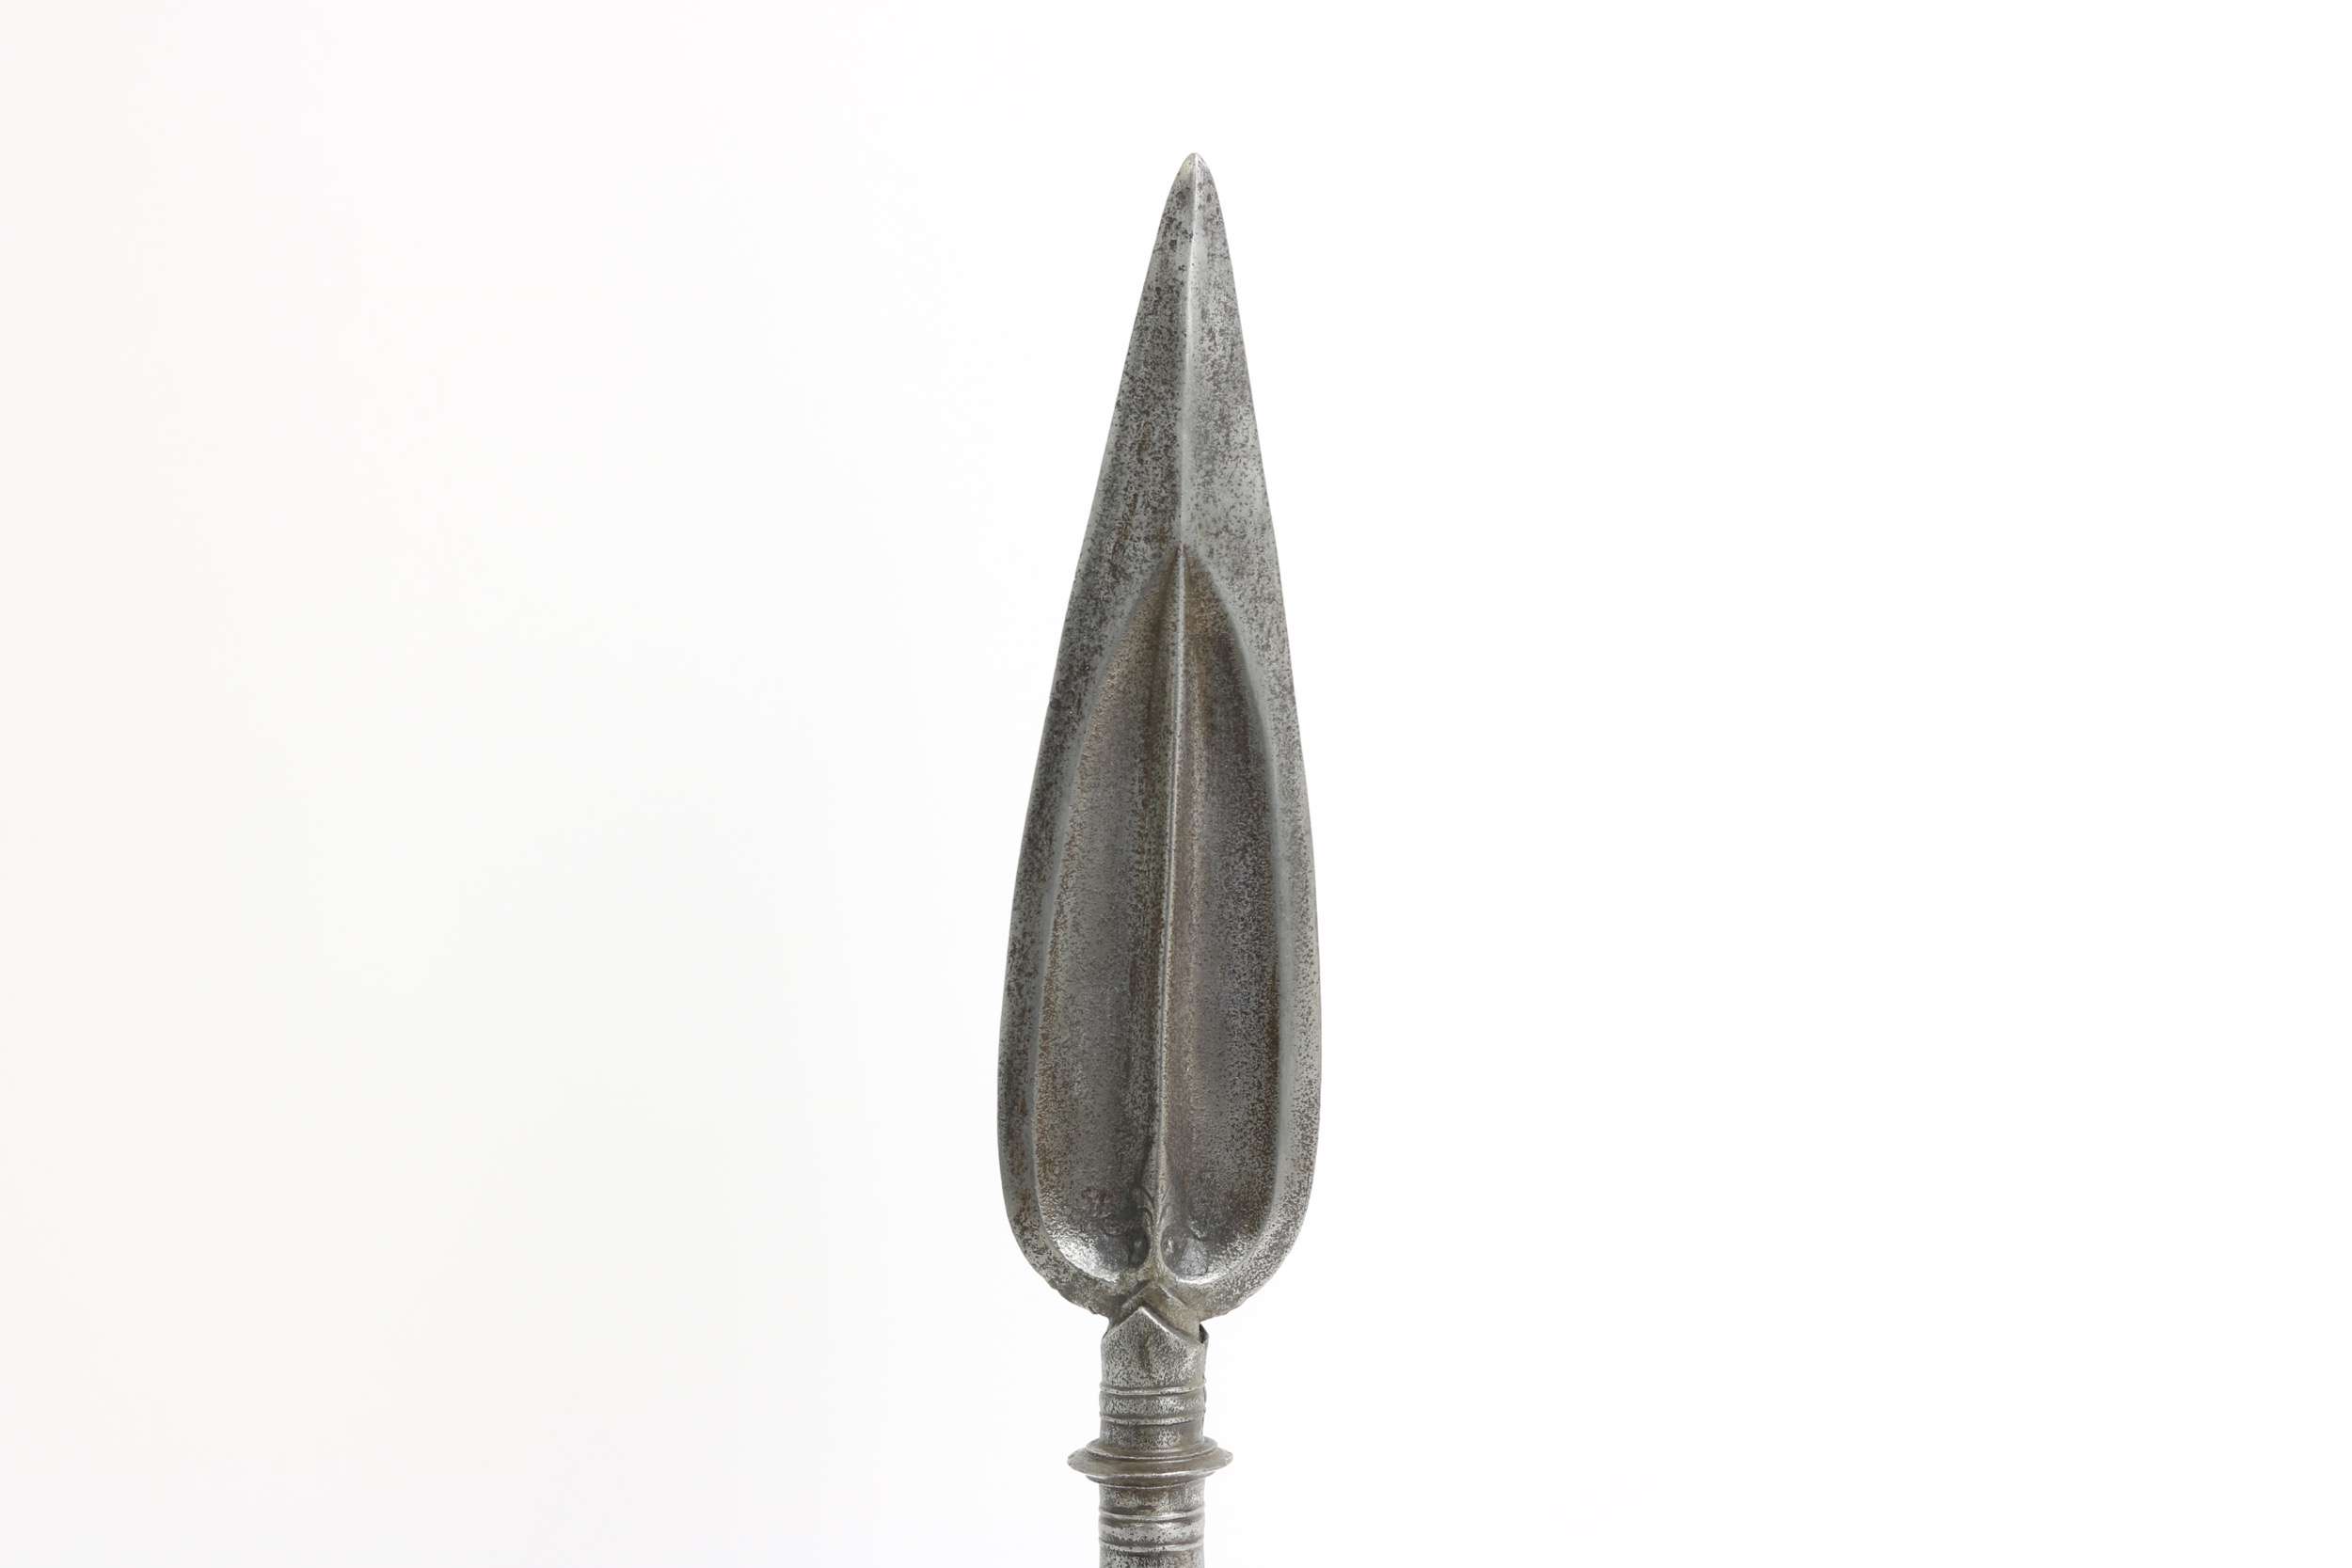 South Indian spearhead